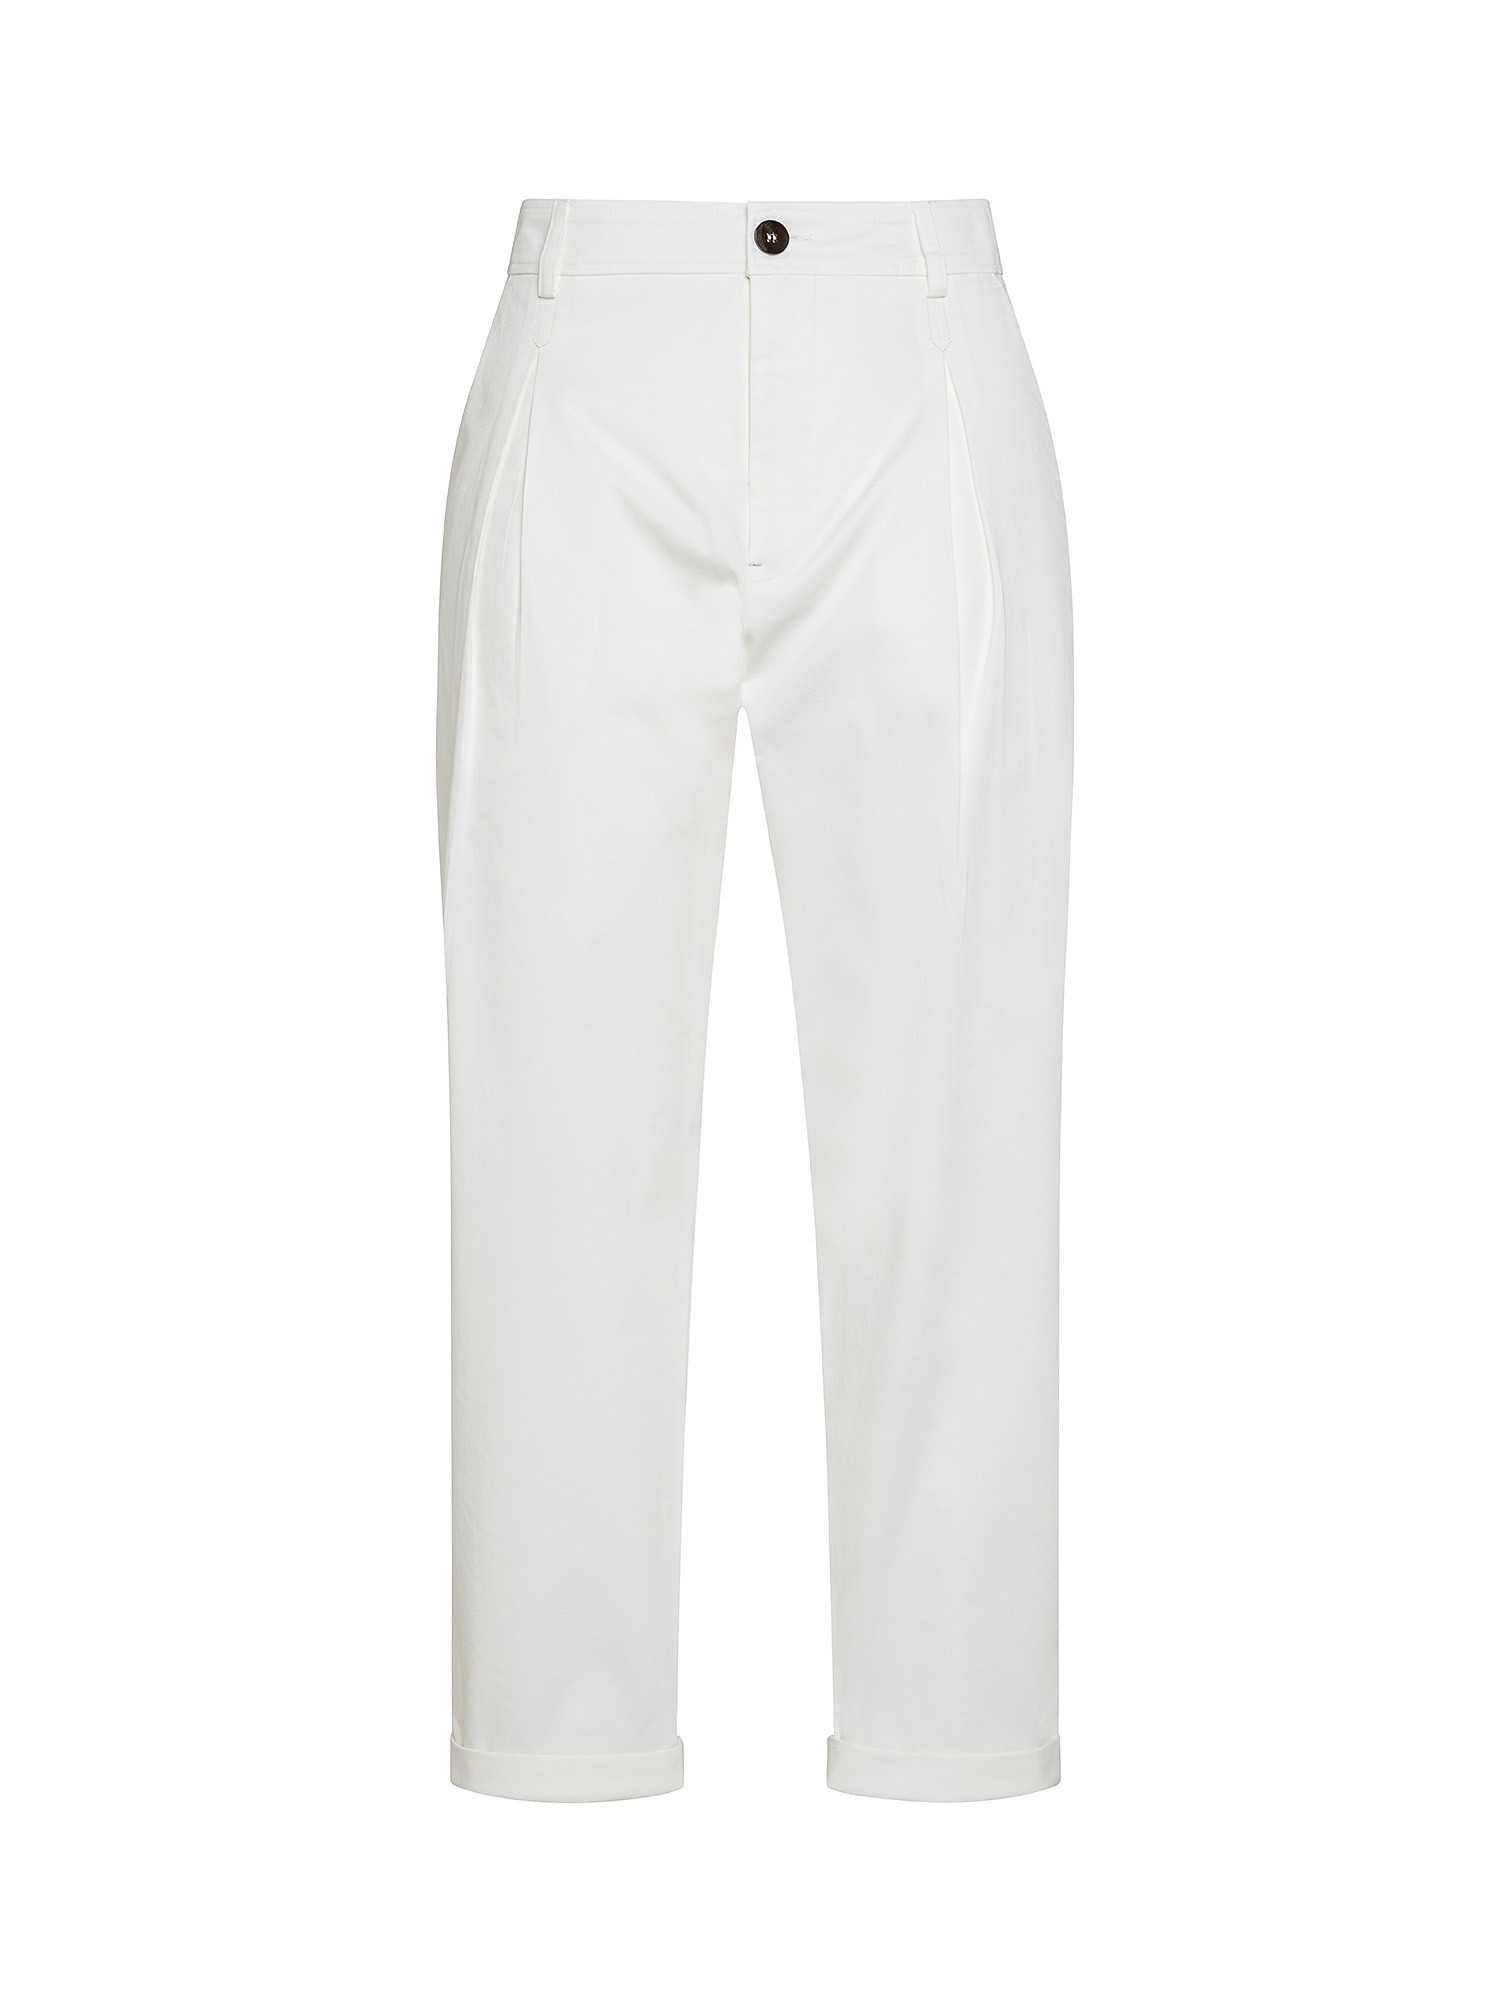 Anderson trousers in stretch cotton gabardine, White, large image number 0